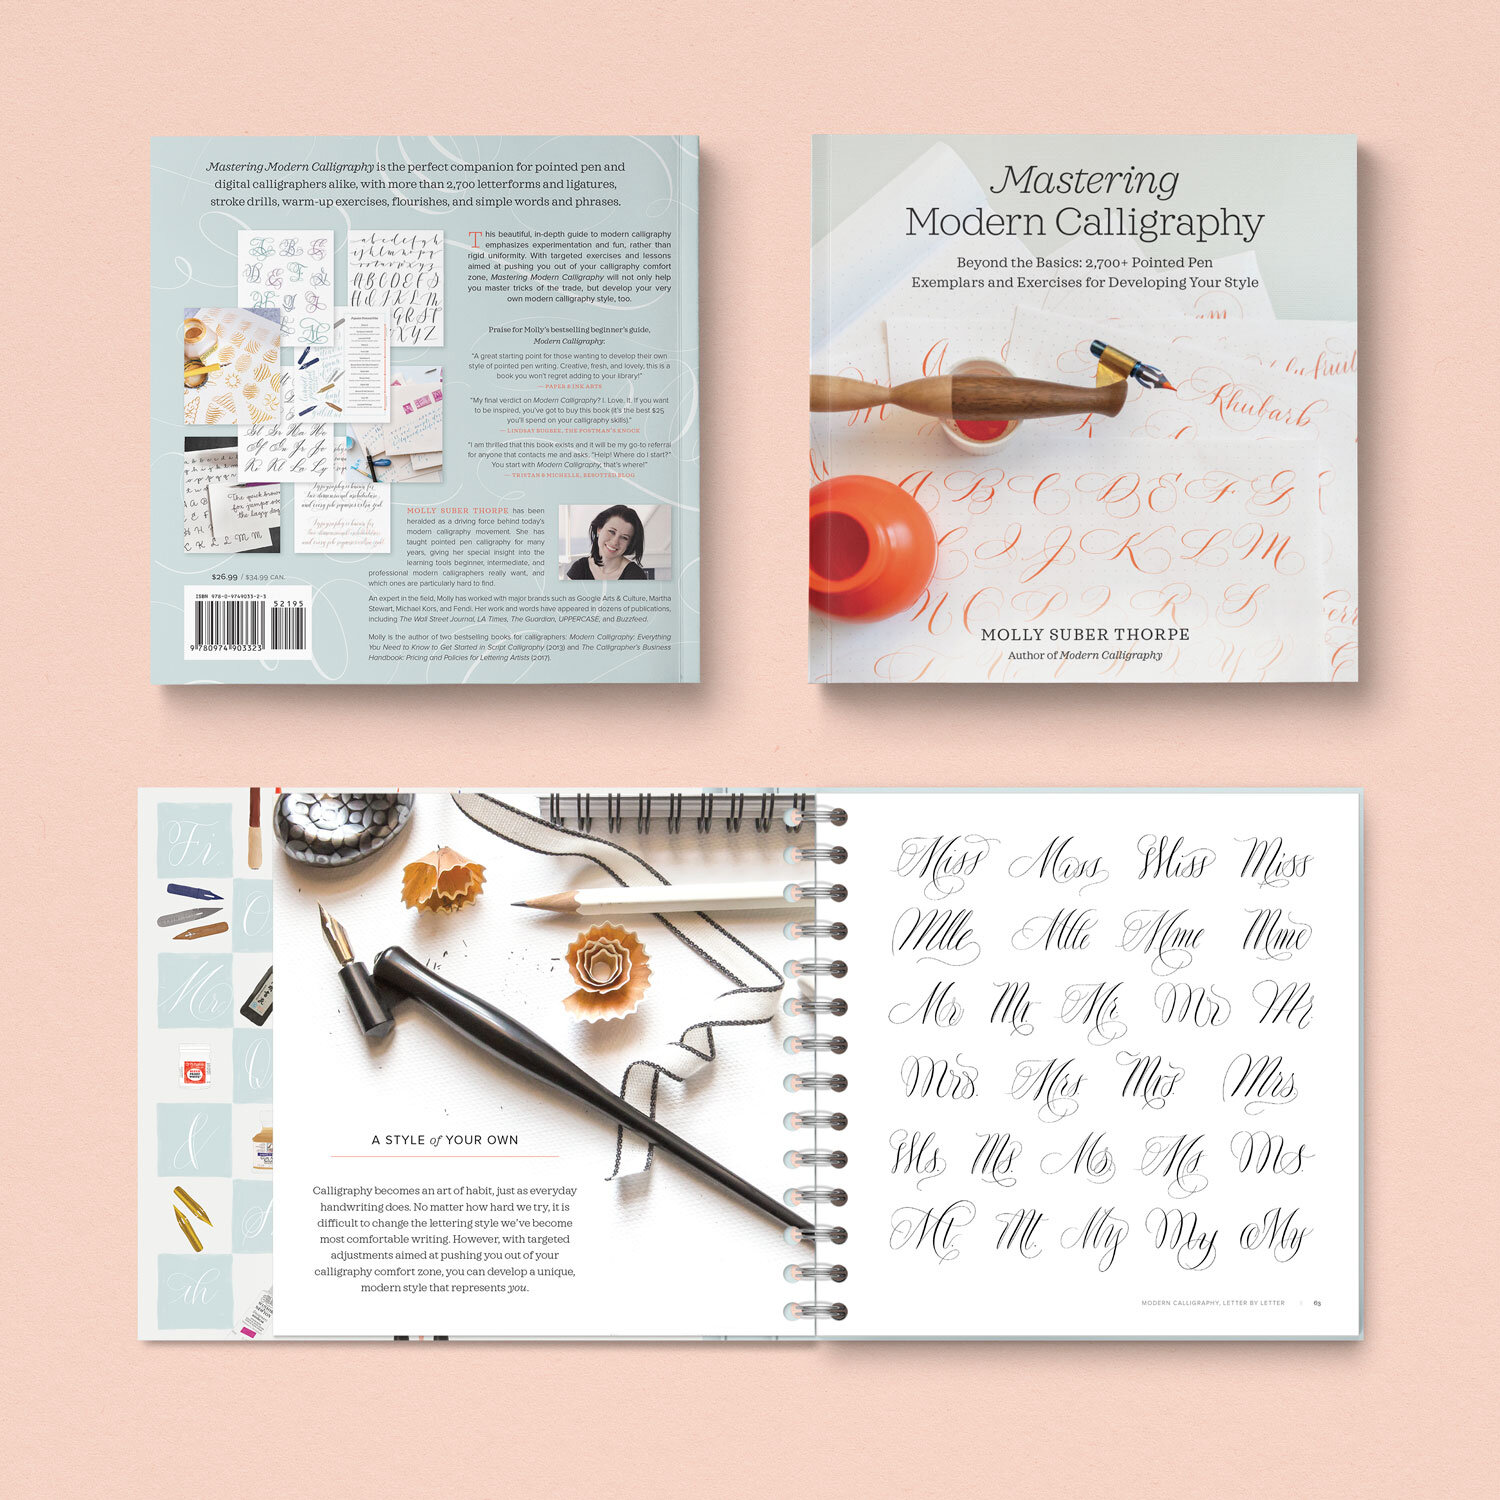 Mastering Modern Calligraphy Book Review - The Postman's Knock